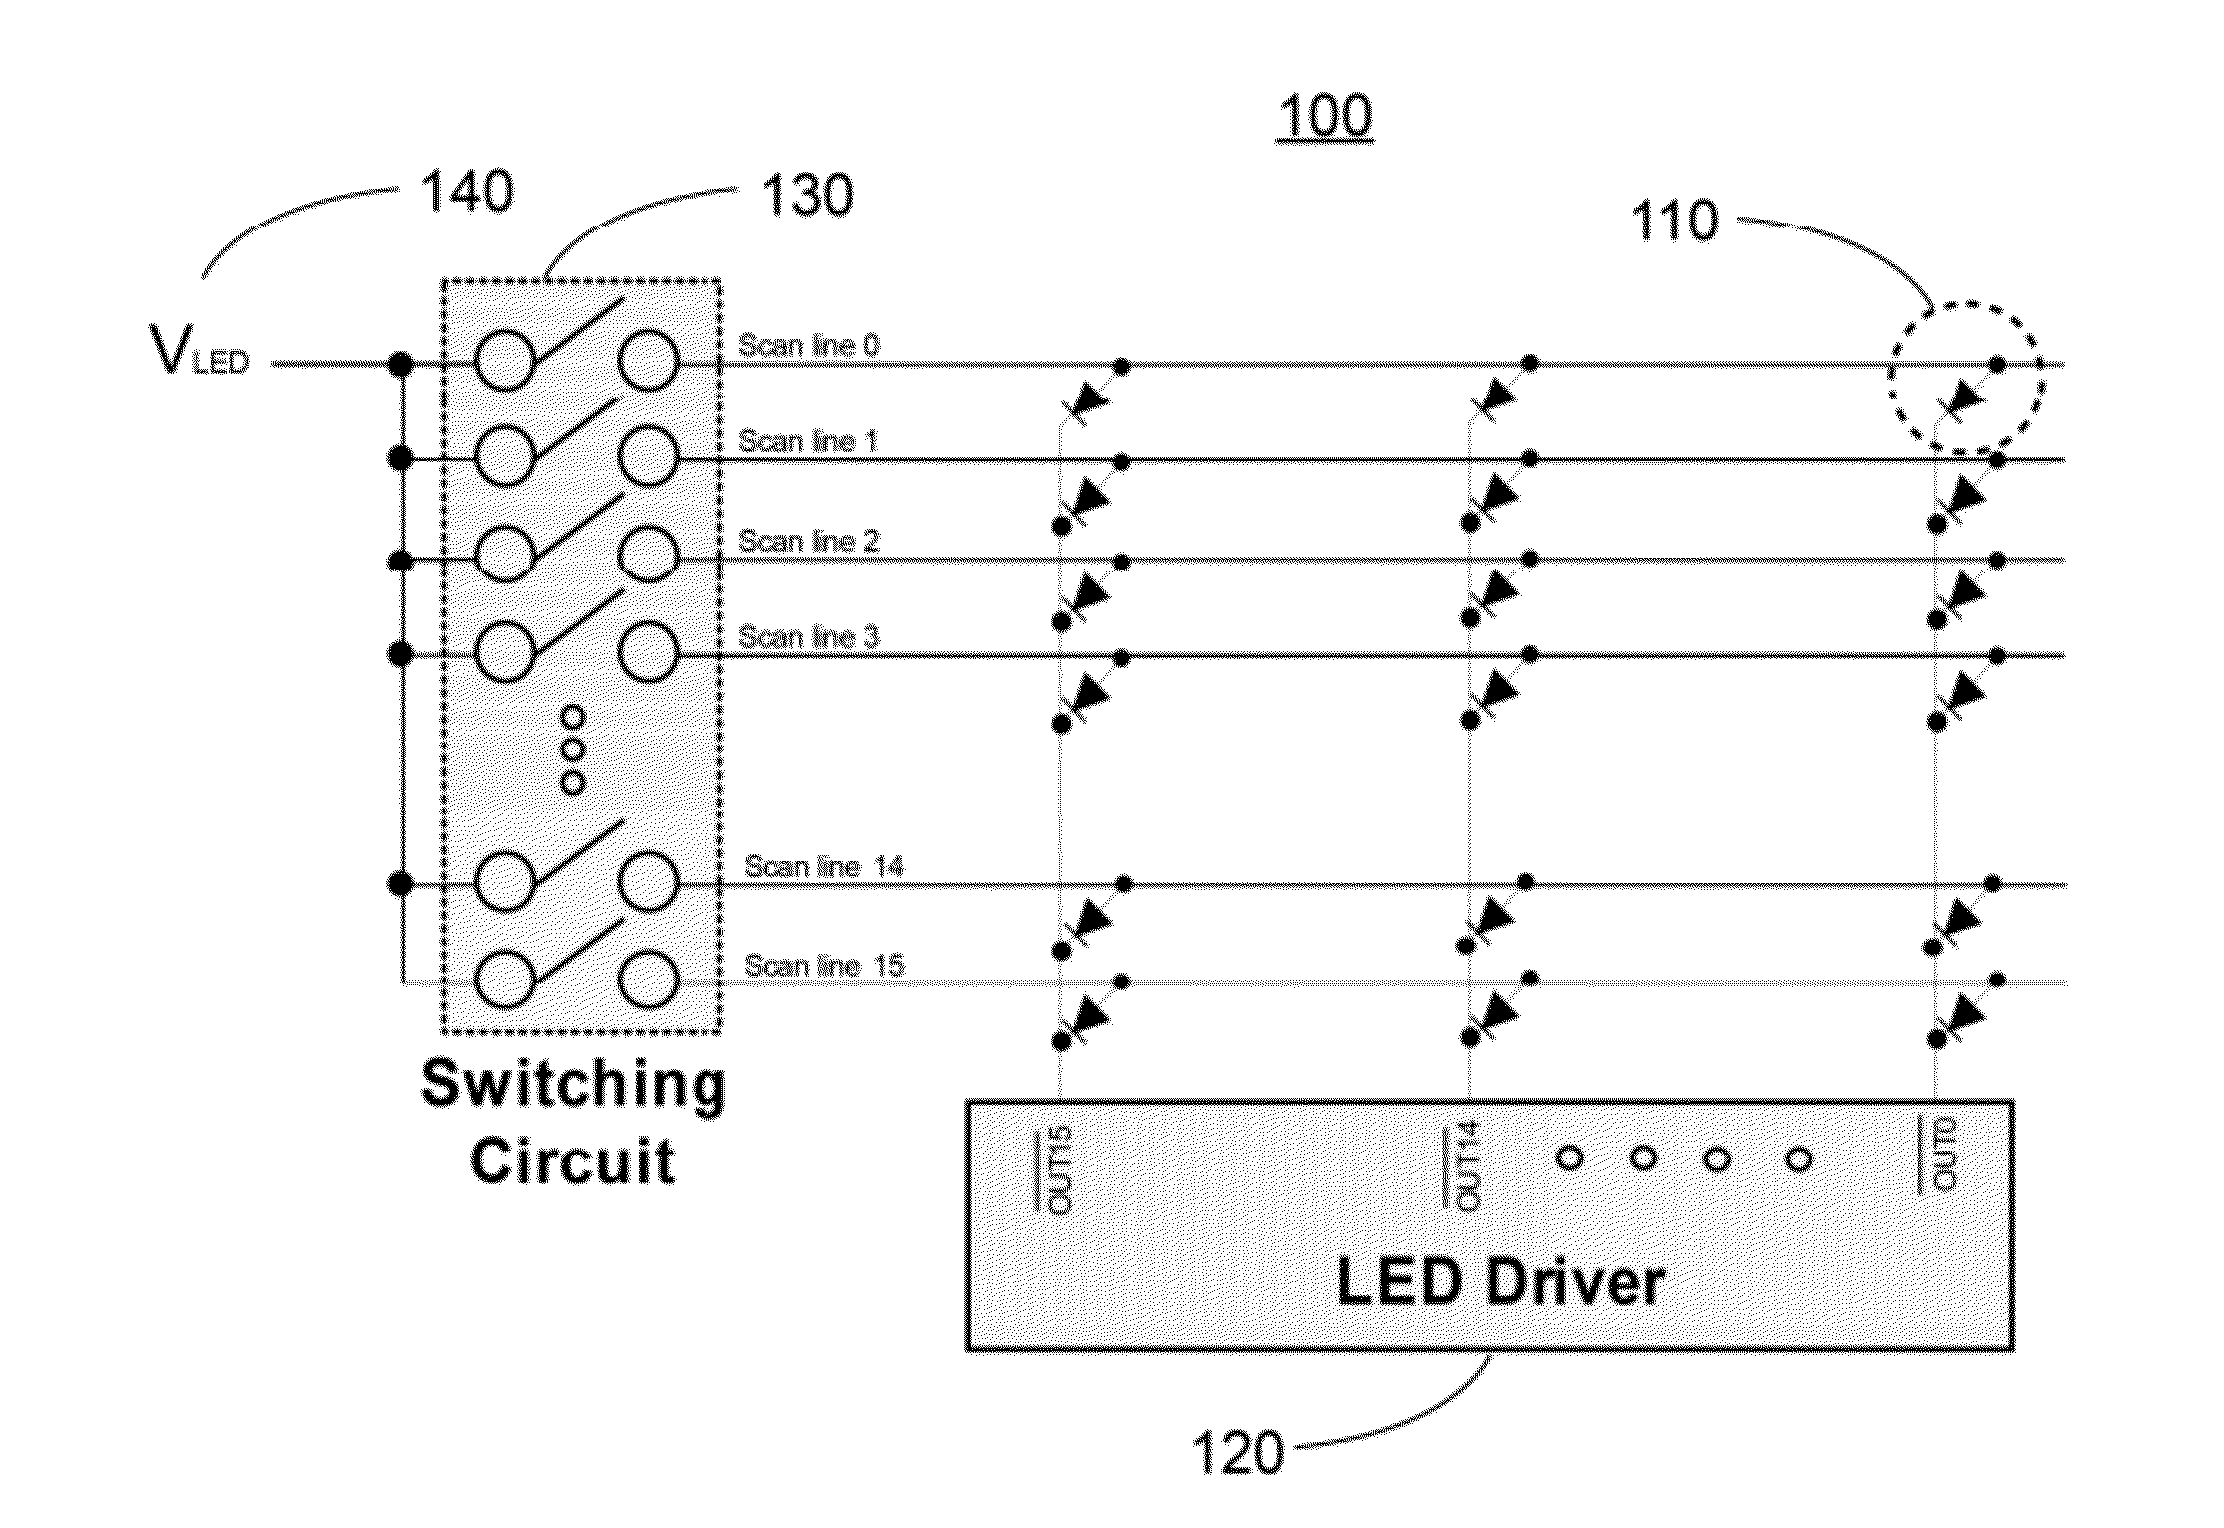 Circuits for eliminating ghosting phenomena in display panel having light emitters